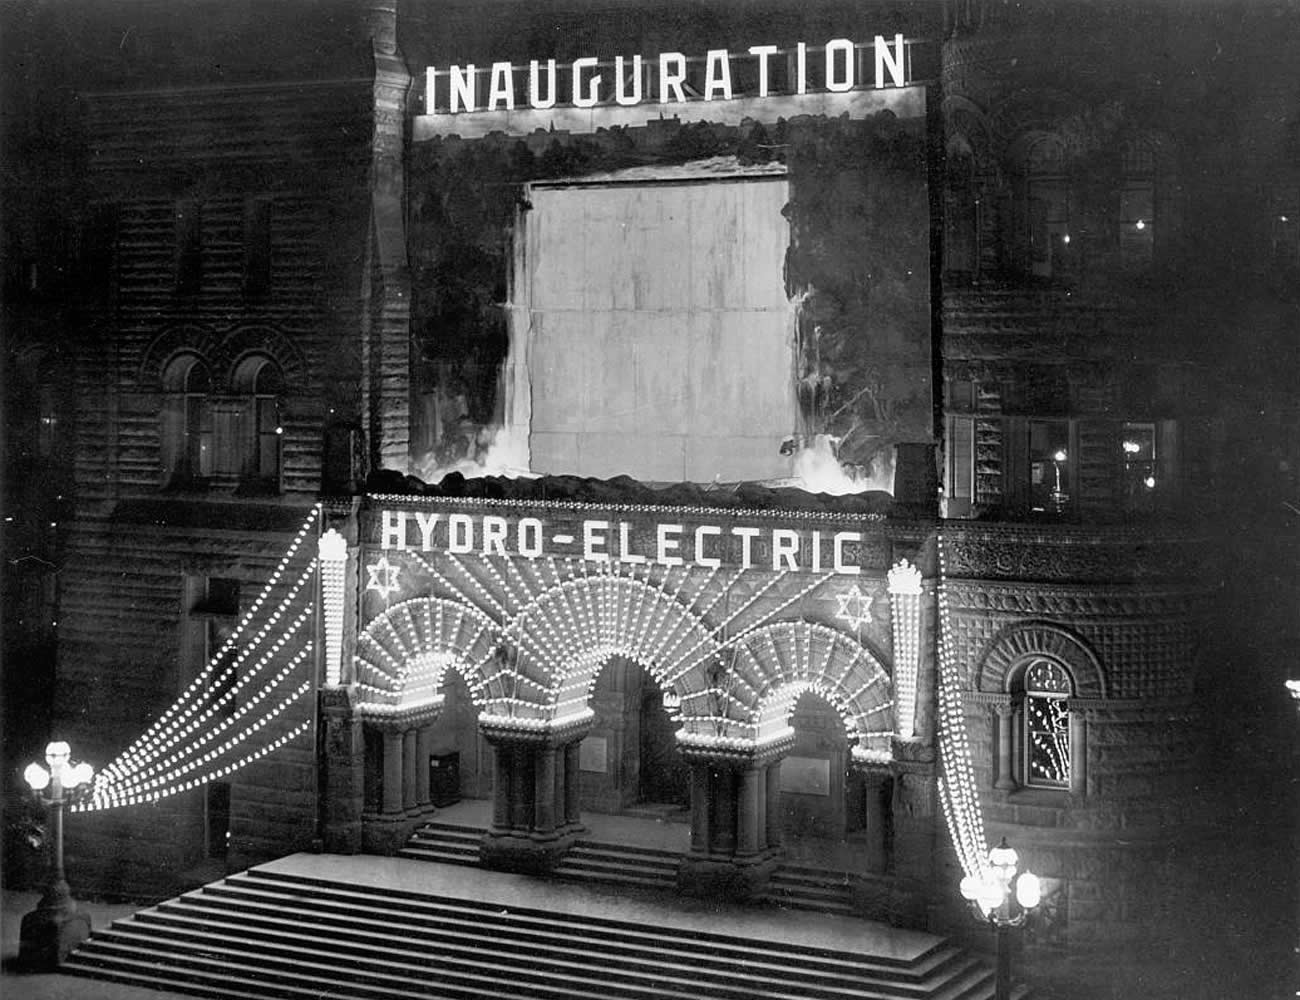 Photograph shows the front of Toronto City Hall at night. The facade is lit up with electric lights reading 'Inauguration, Hydro-Electric.' Above the main doors of City Hall is a picture of Niagara Falls to show where the hydro-electric power originated.